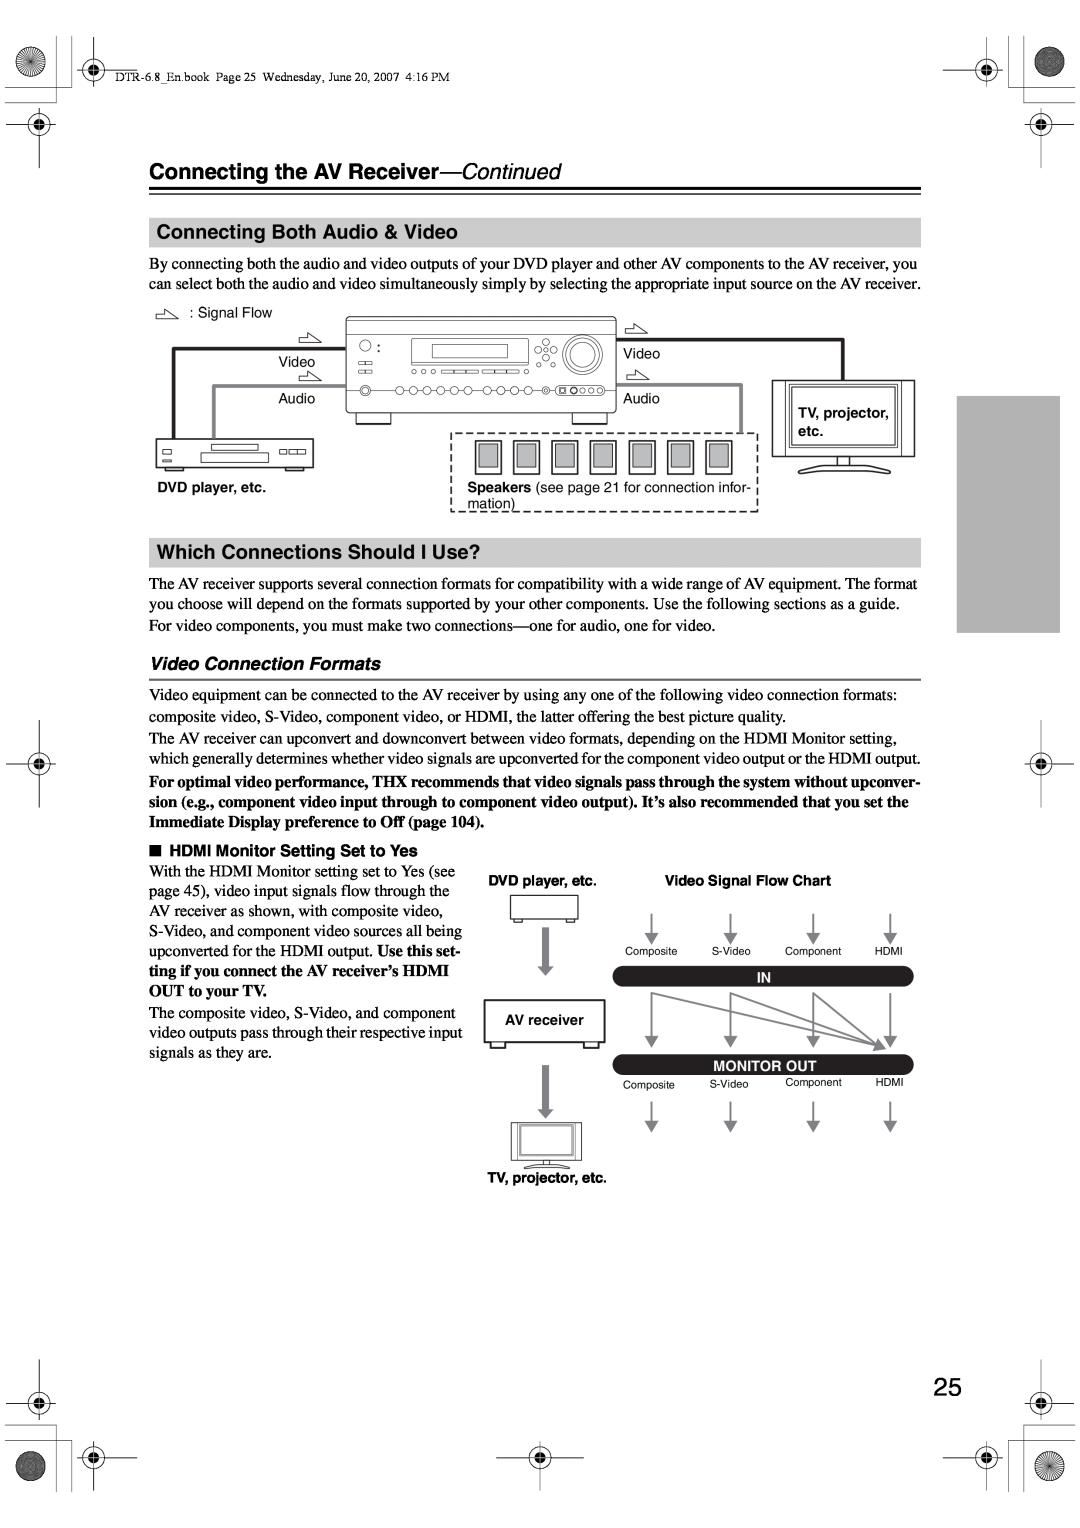 Integra DTR-6.8 instruction manual Connecting Both Audio & Video, Which Connections Should I Use?, Video Connection Formats 